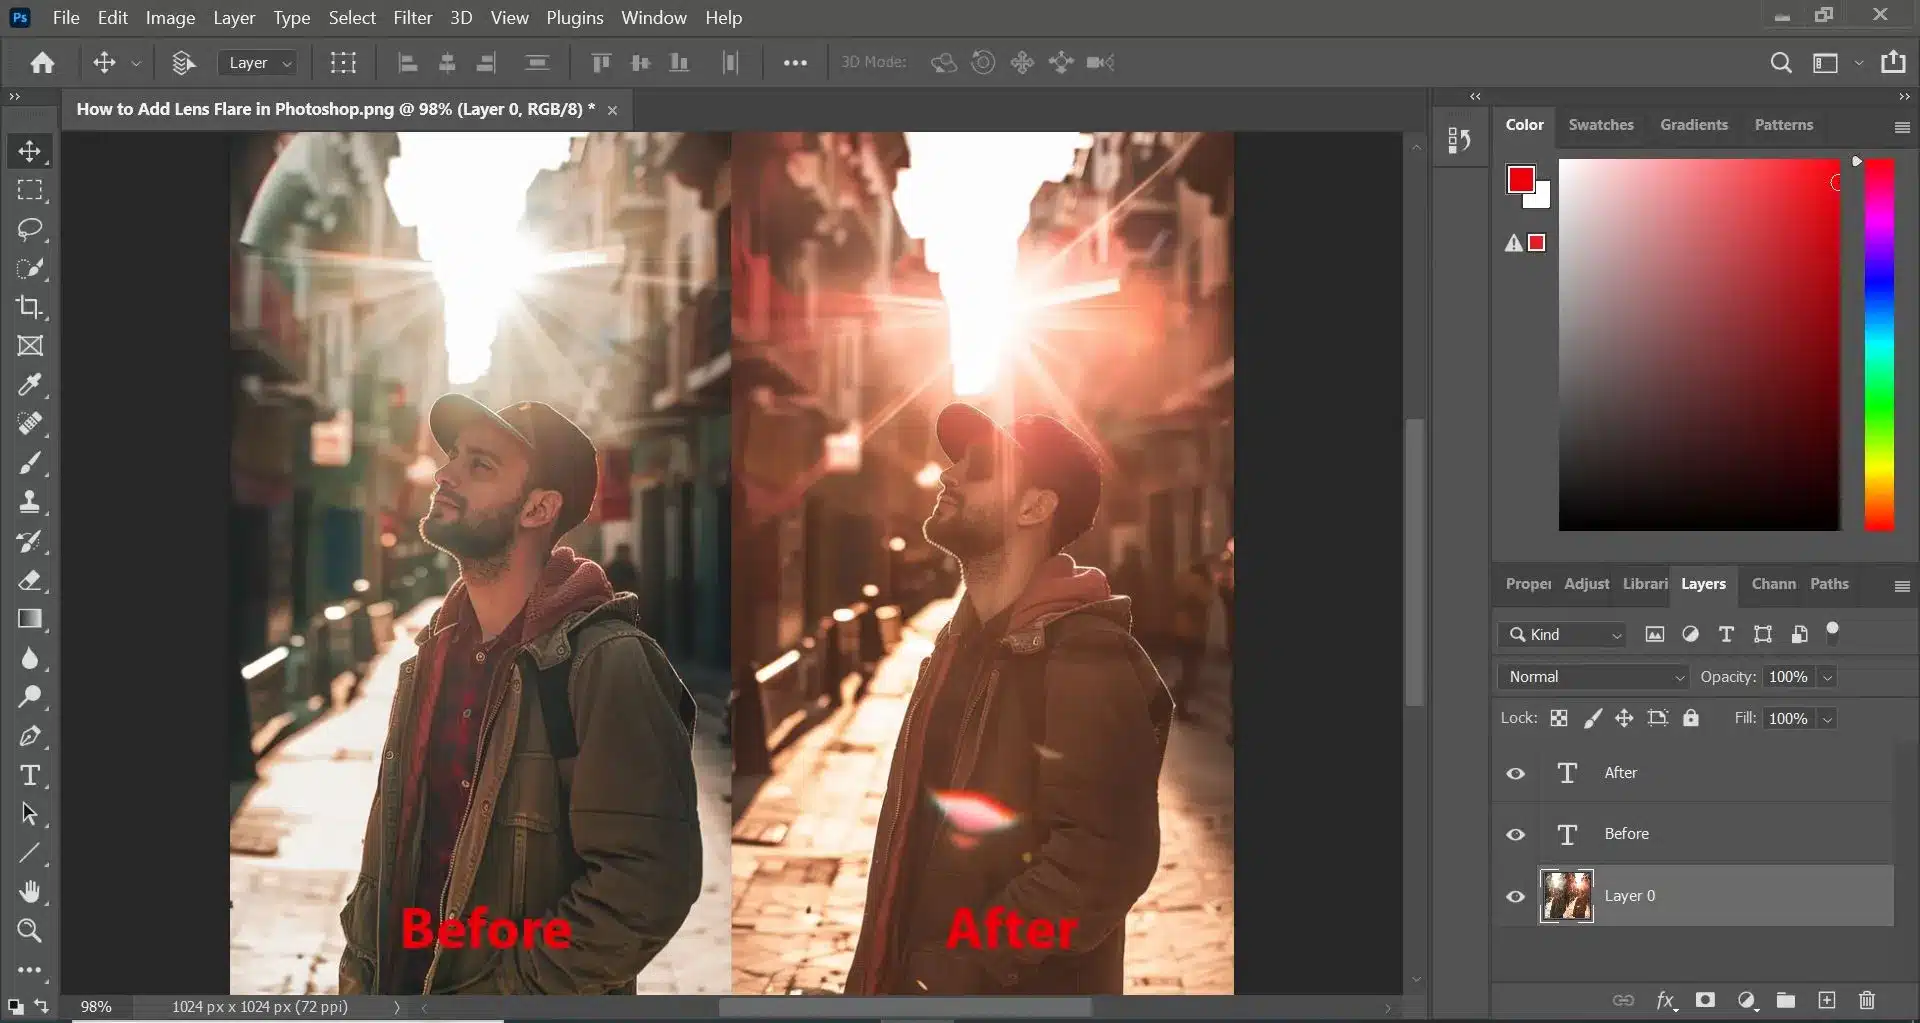 A screenshot of the Photoshop interface showing the process of adding lens flare, with a before-and-after comparison of a man standing on a street.